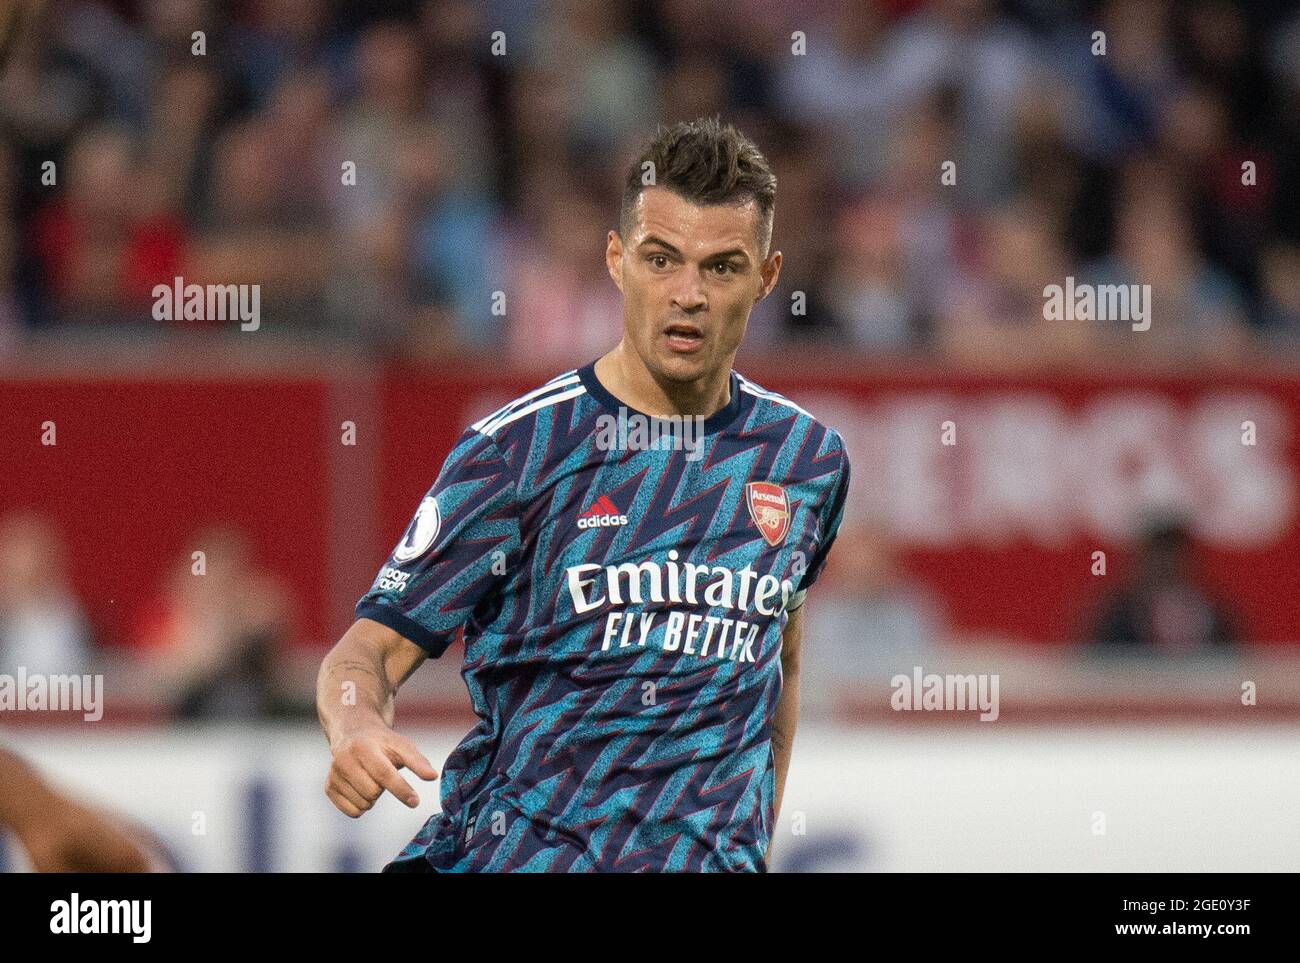 Brentford, UK. 13th Aug, 2021. Arsenal Granit Xhaka during the Premier League match between Brentford and Arsenal at the Brentford Community Stadium, Brentford, England on 13 August 2021. Photo by Andrew Aleksiejczuk/PRiME Media Images. Credit: PRiME Media Images/Alamy Live News Stock Photo